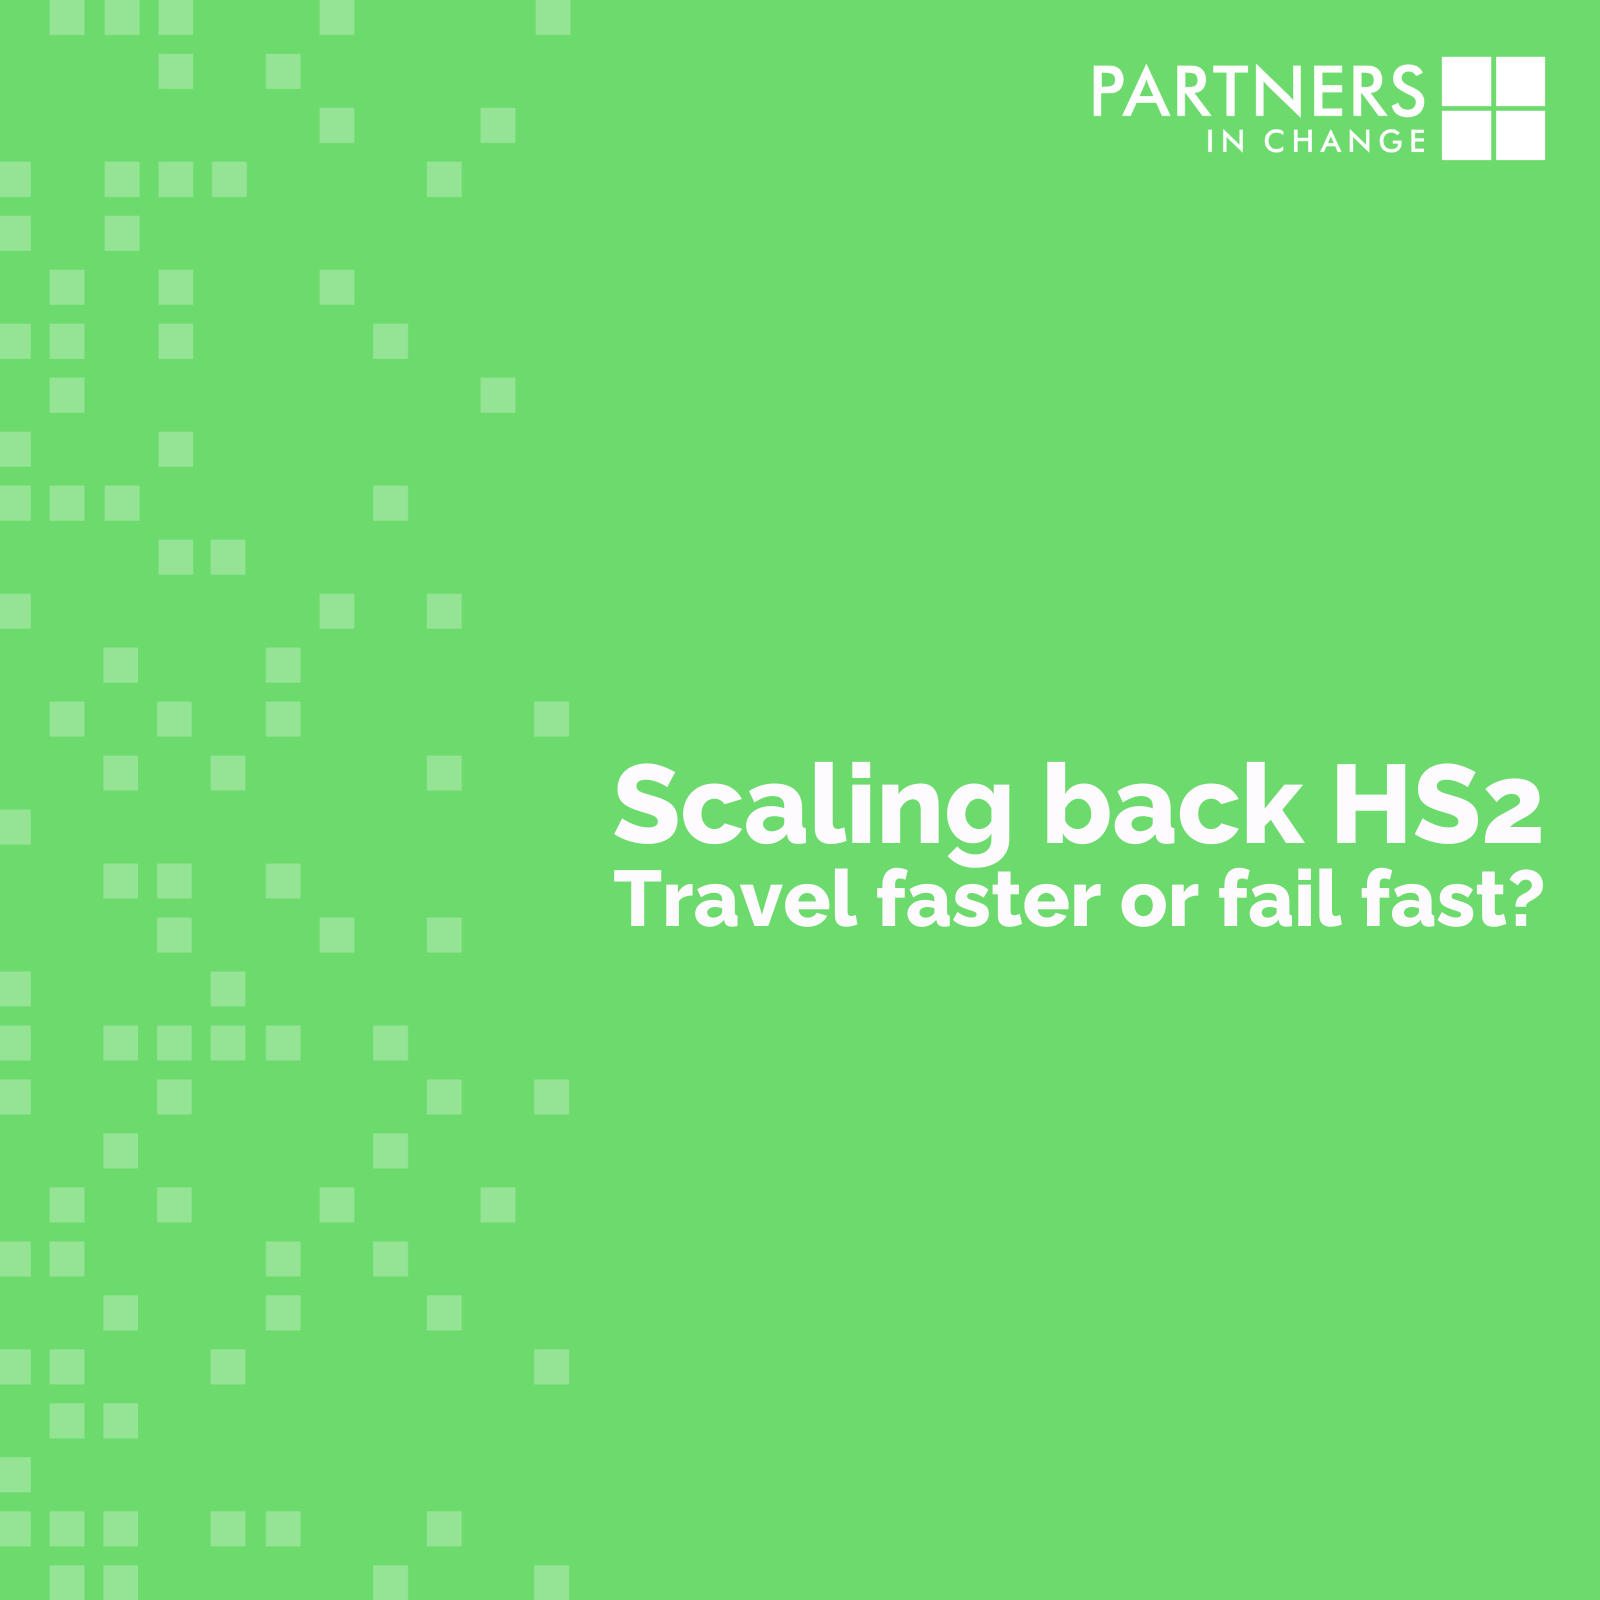 Travel faster or fail fast? Is HS2 a major change failure?